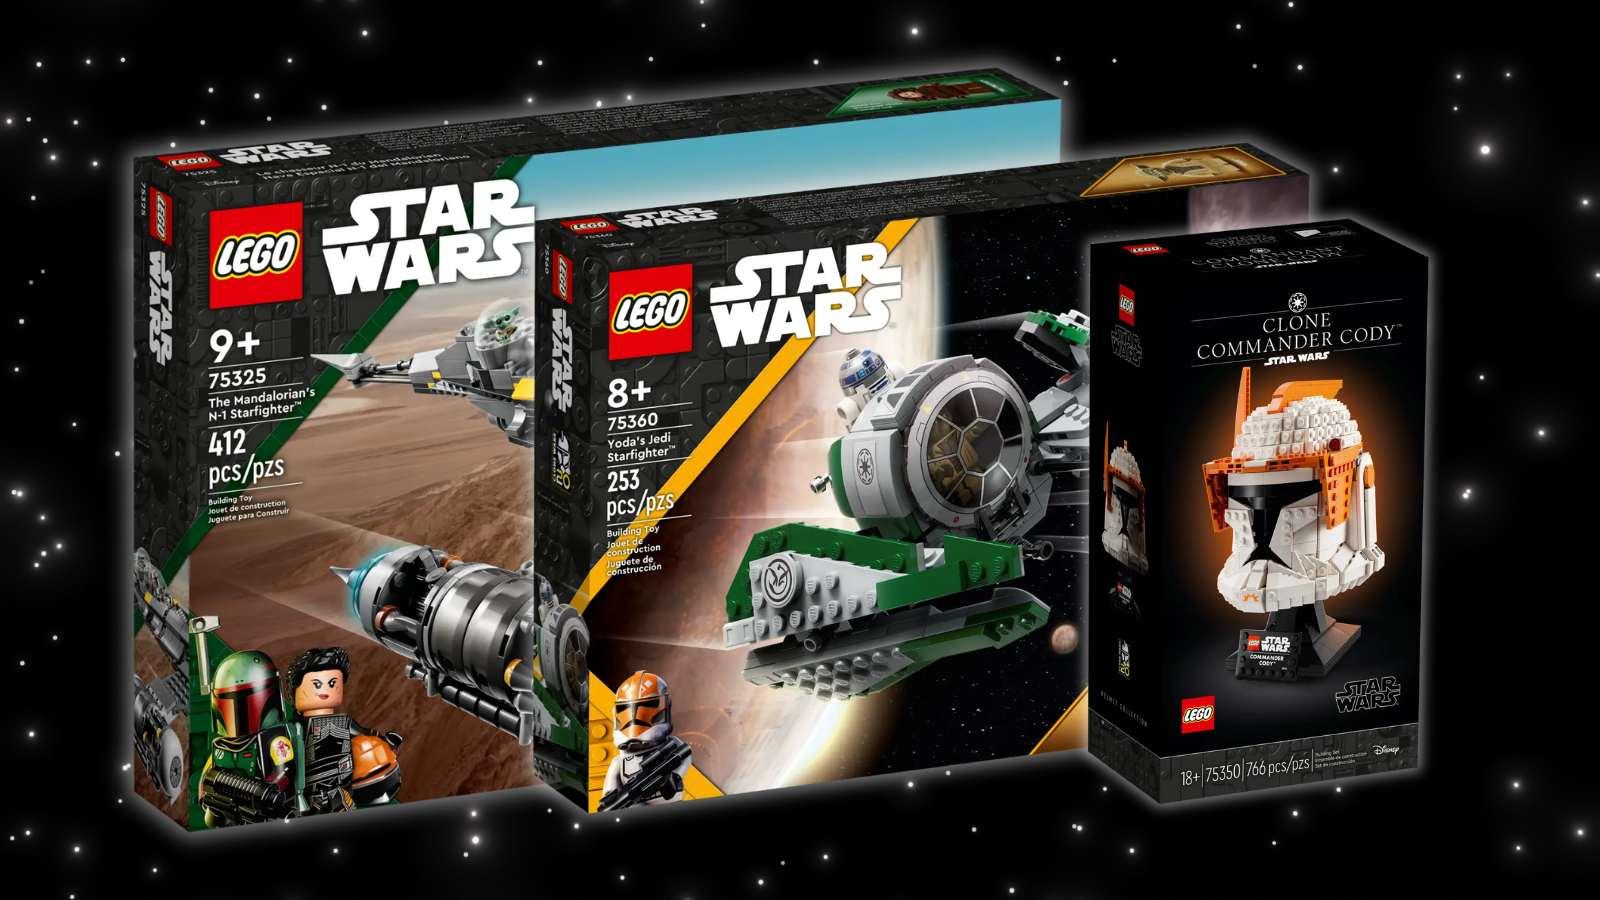 Save on recent and retiring LEGO Star Wars sets at Best Buy for